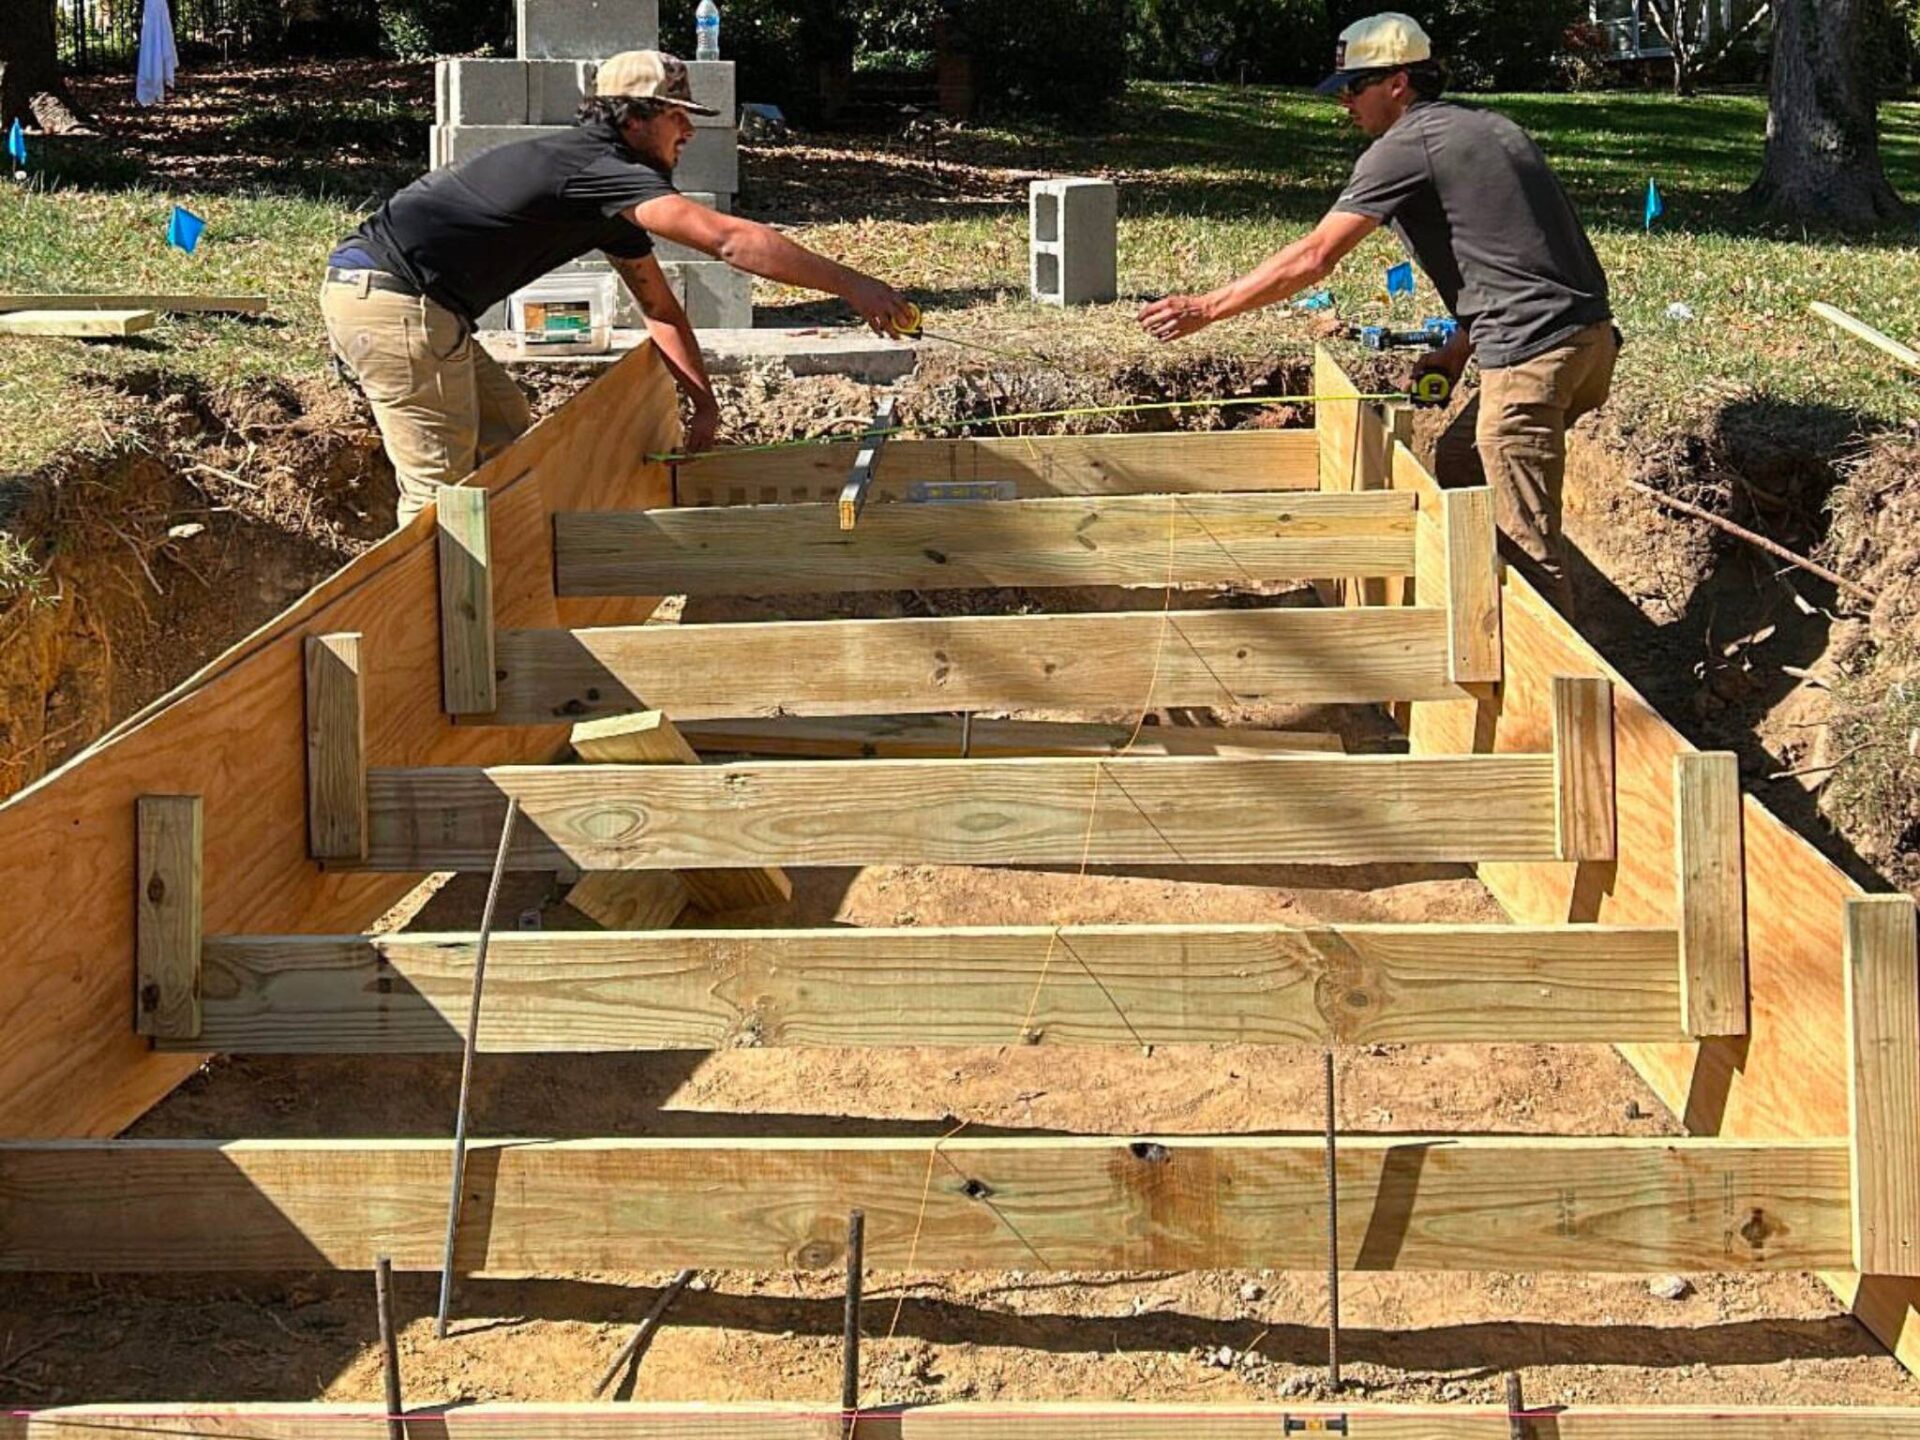 Two men constructing a wooden structure in a yard, showcasing their craftsmanship and teamwork.